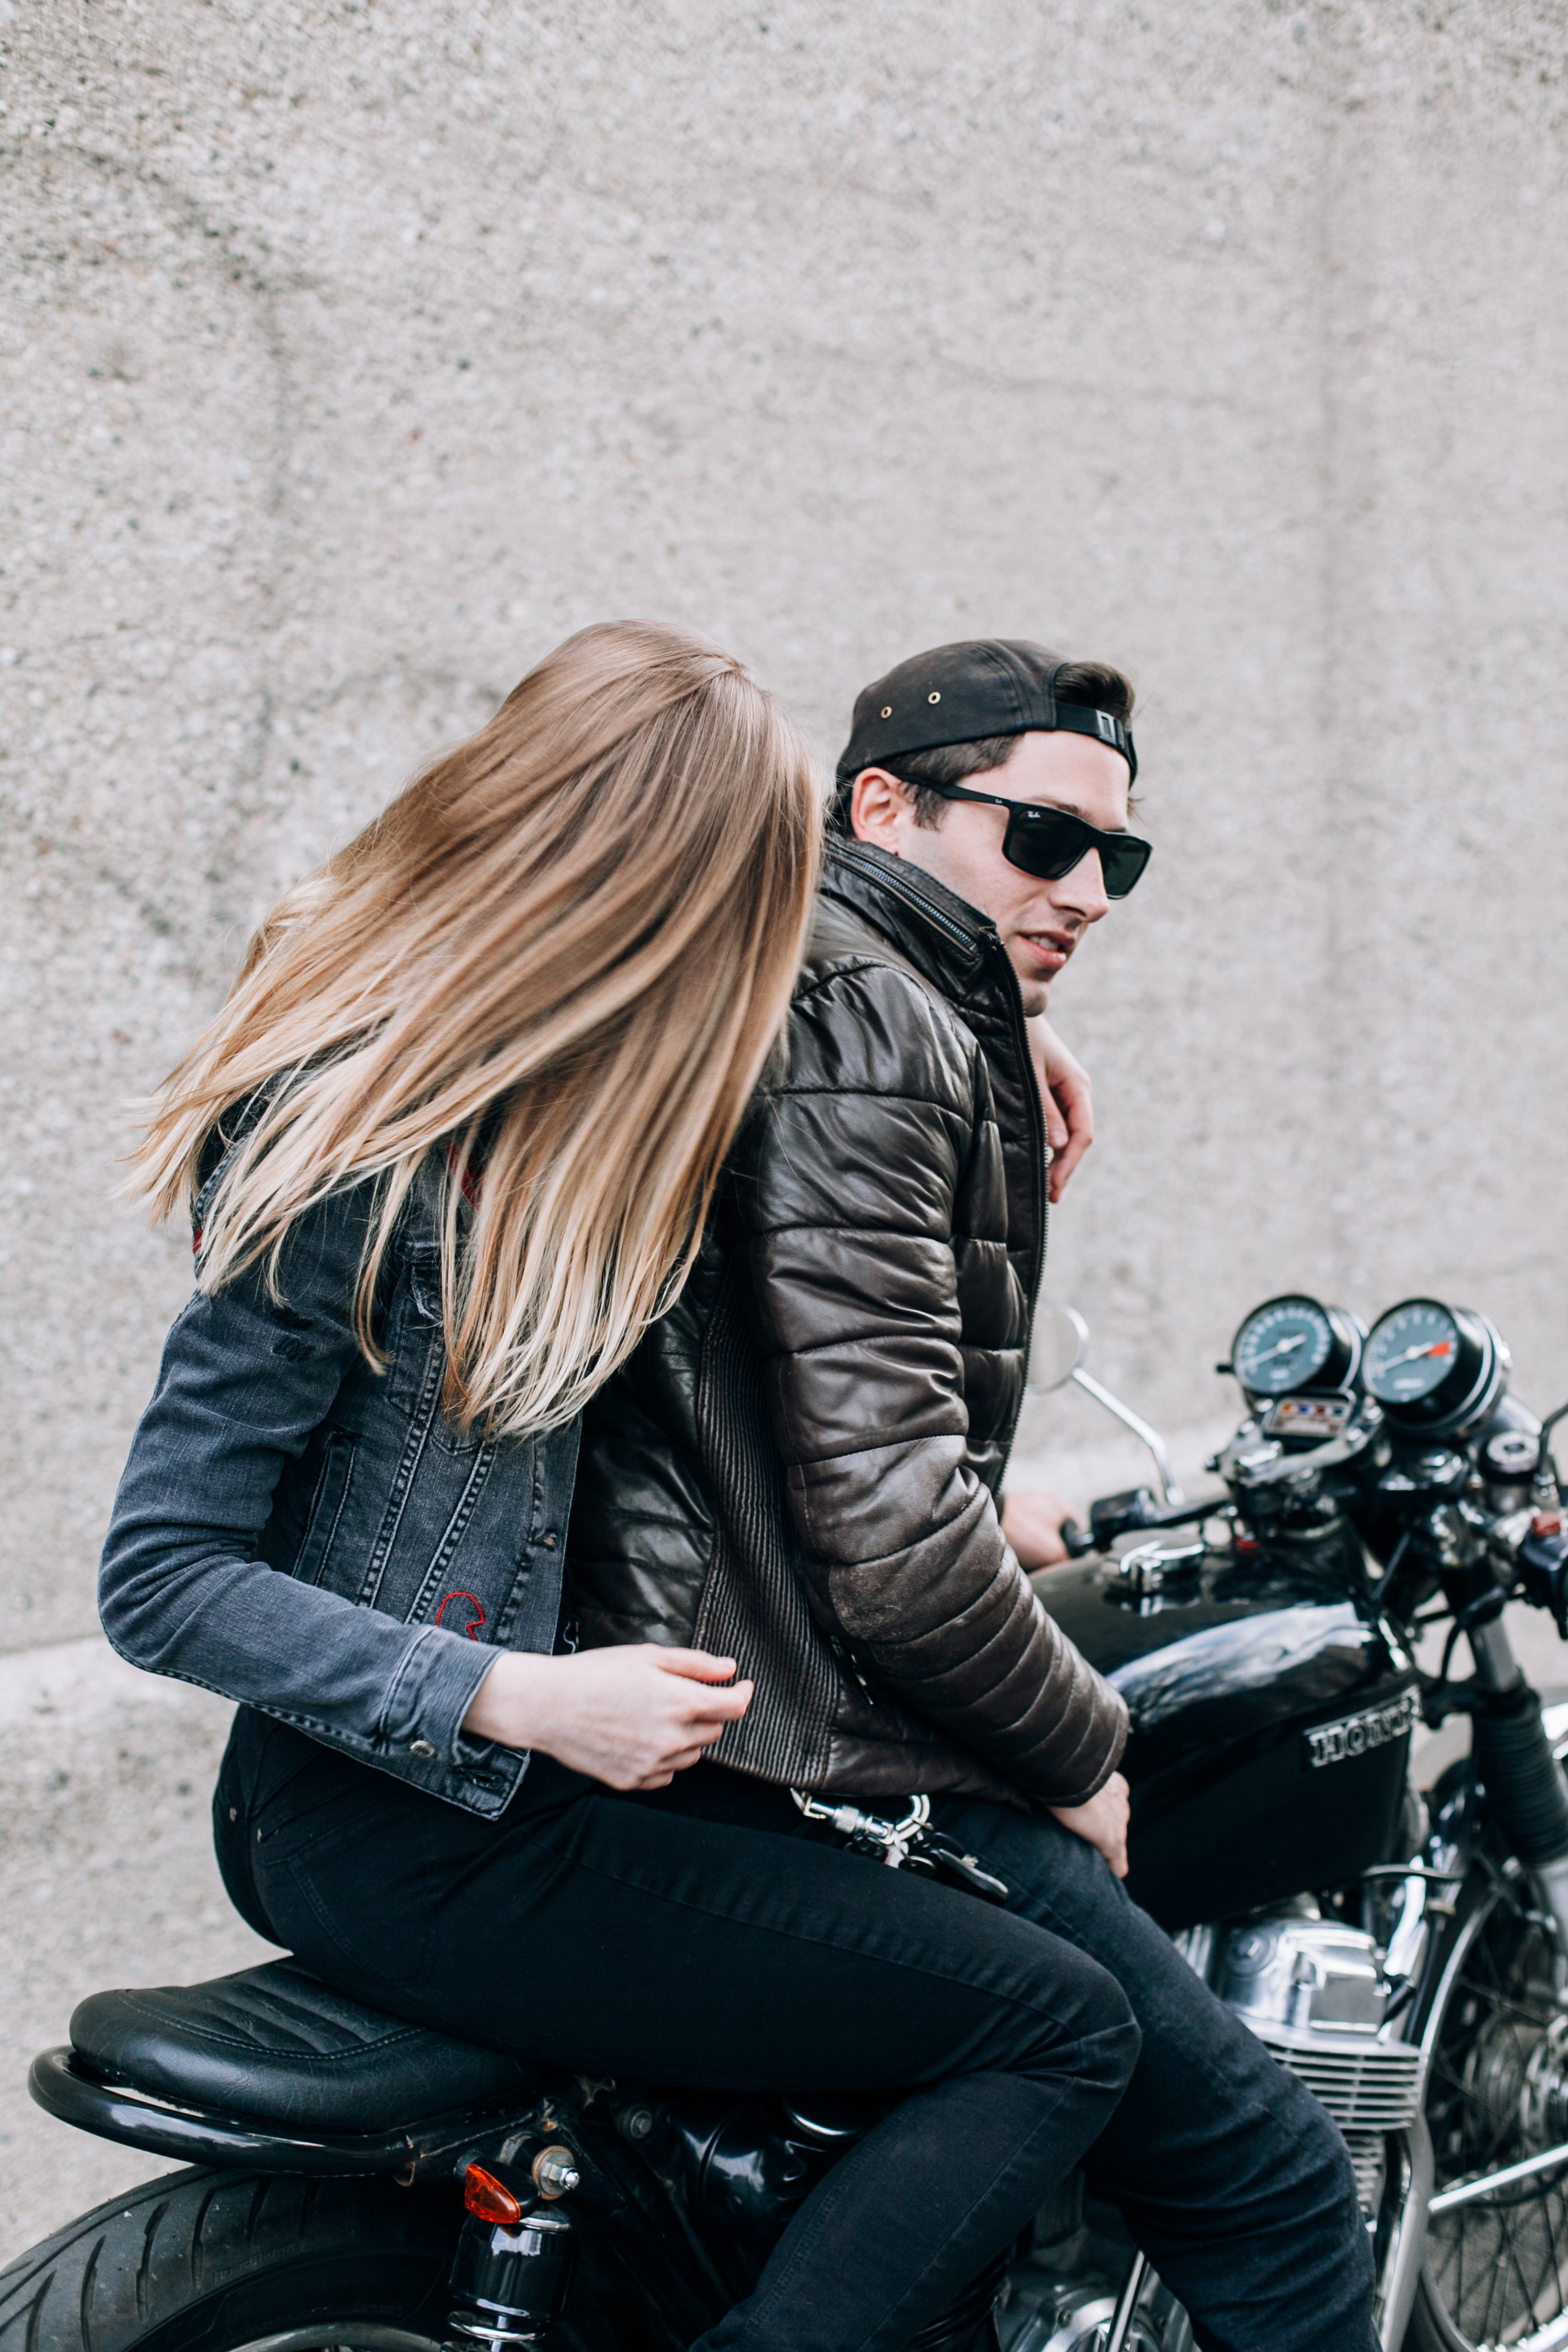 Chicago Engagement Photographer, Illinois Engagement Photographer, Chi-town Engagement photographer, Biker photos, Chicago Photographer, Chicago Portrait Photographer, Couple on a motorcycle session